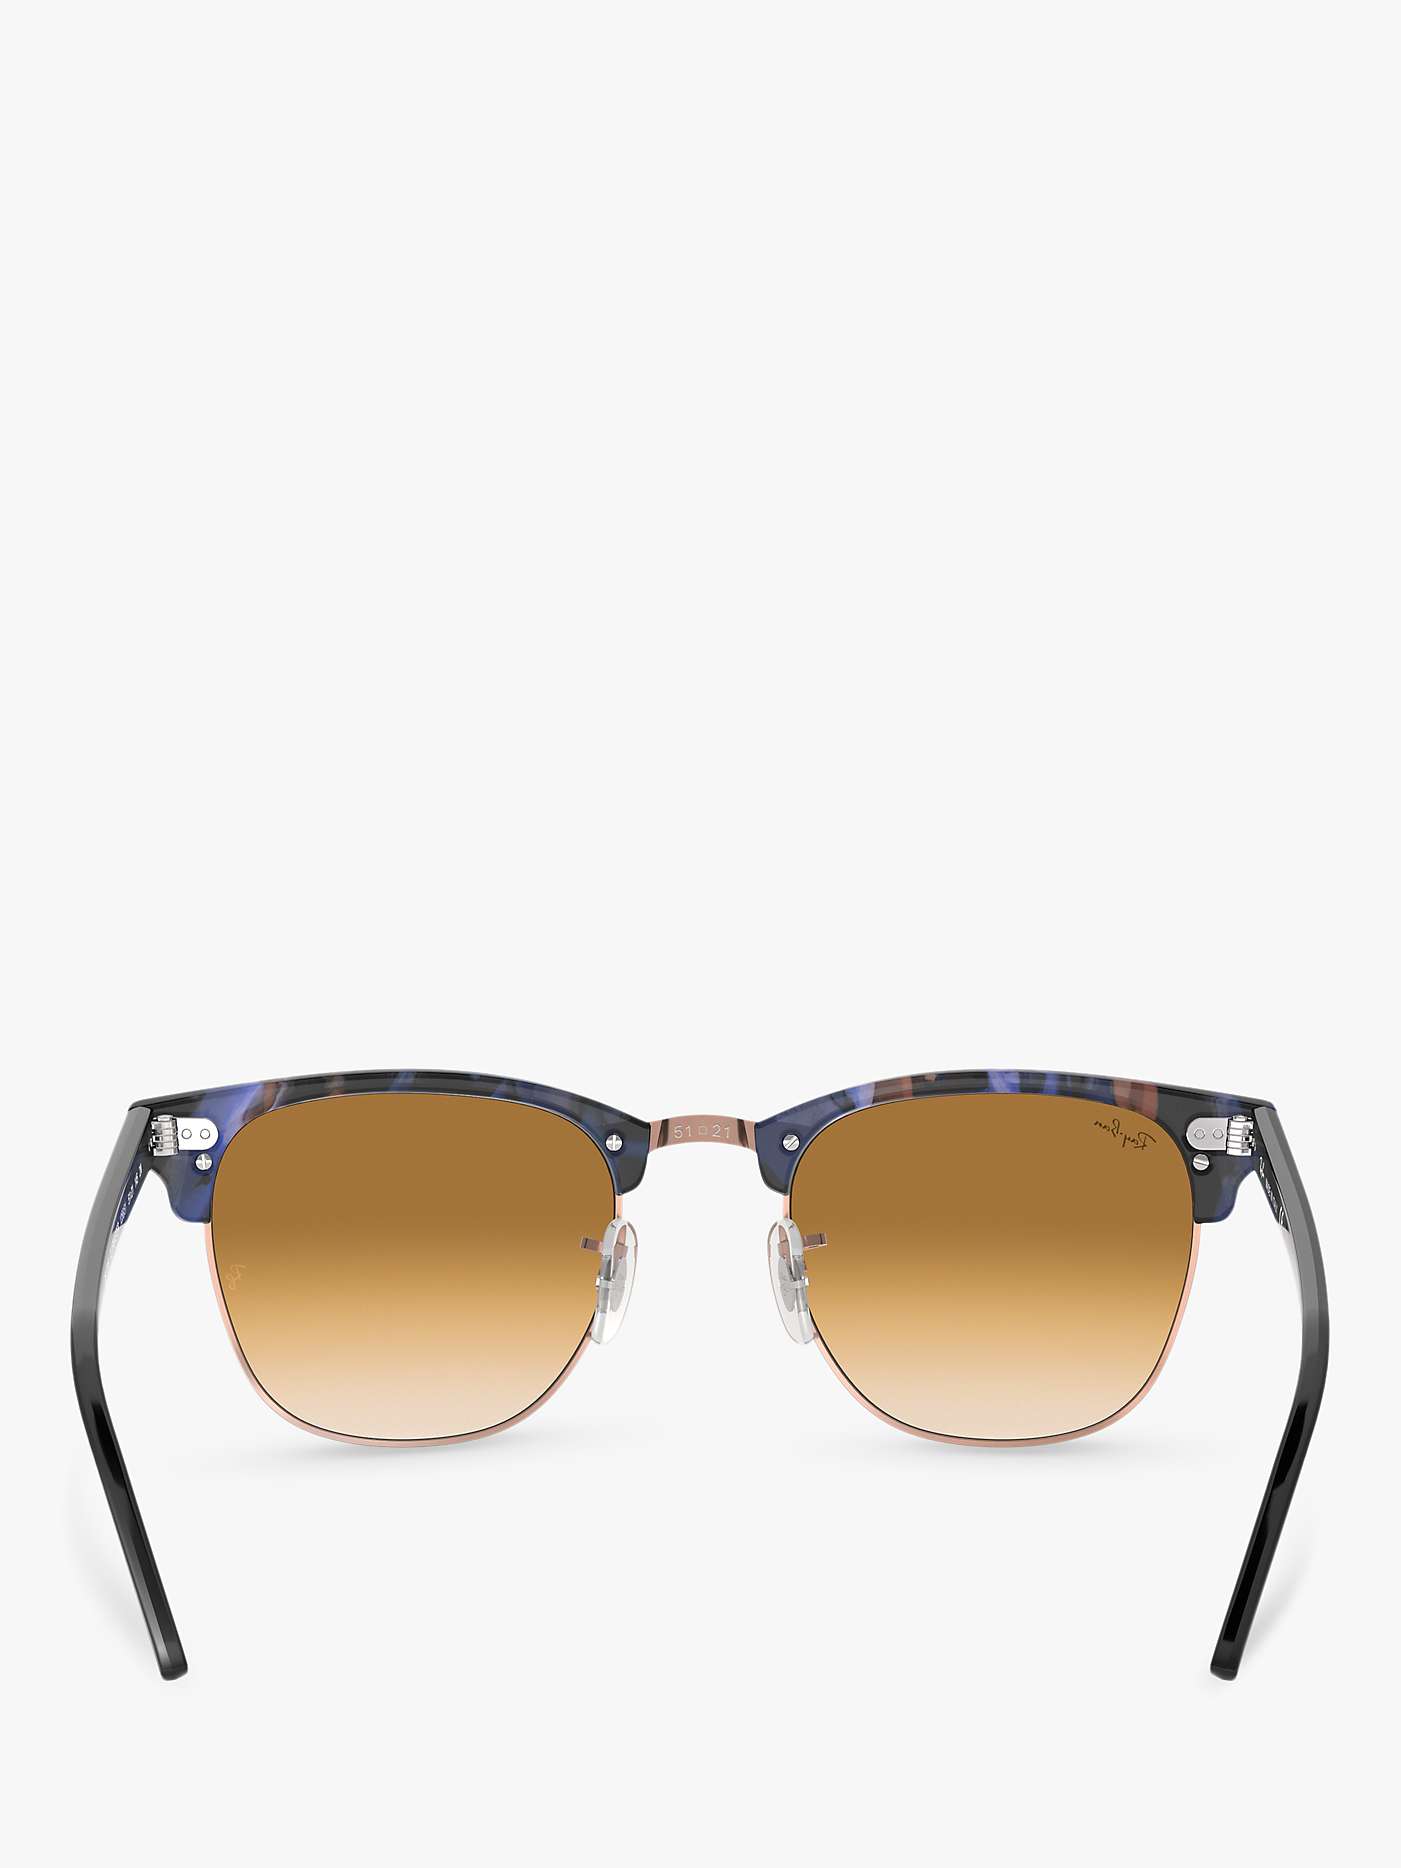 Buy Ray-Ban RB3016 Men's Classic Clubmaster Sunglasses, Spotted Blue/Brown Gradient Online at johnlewis.com